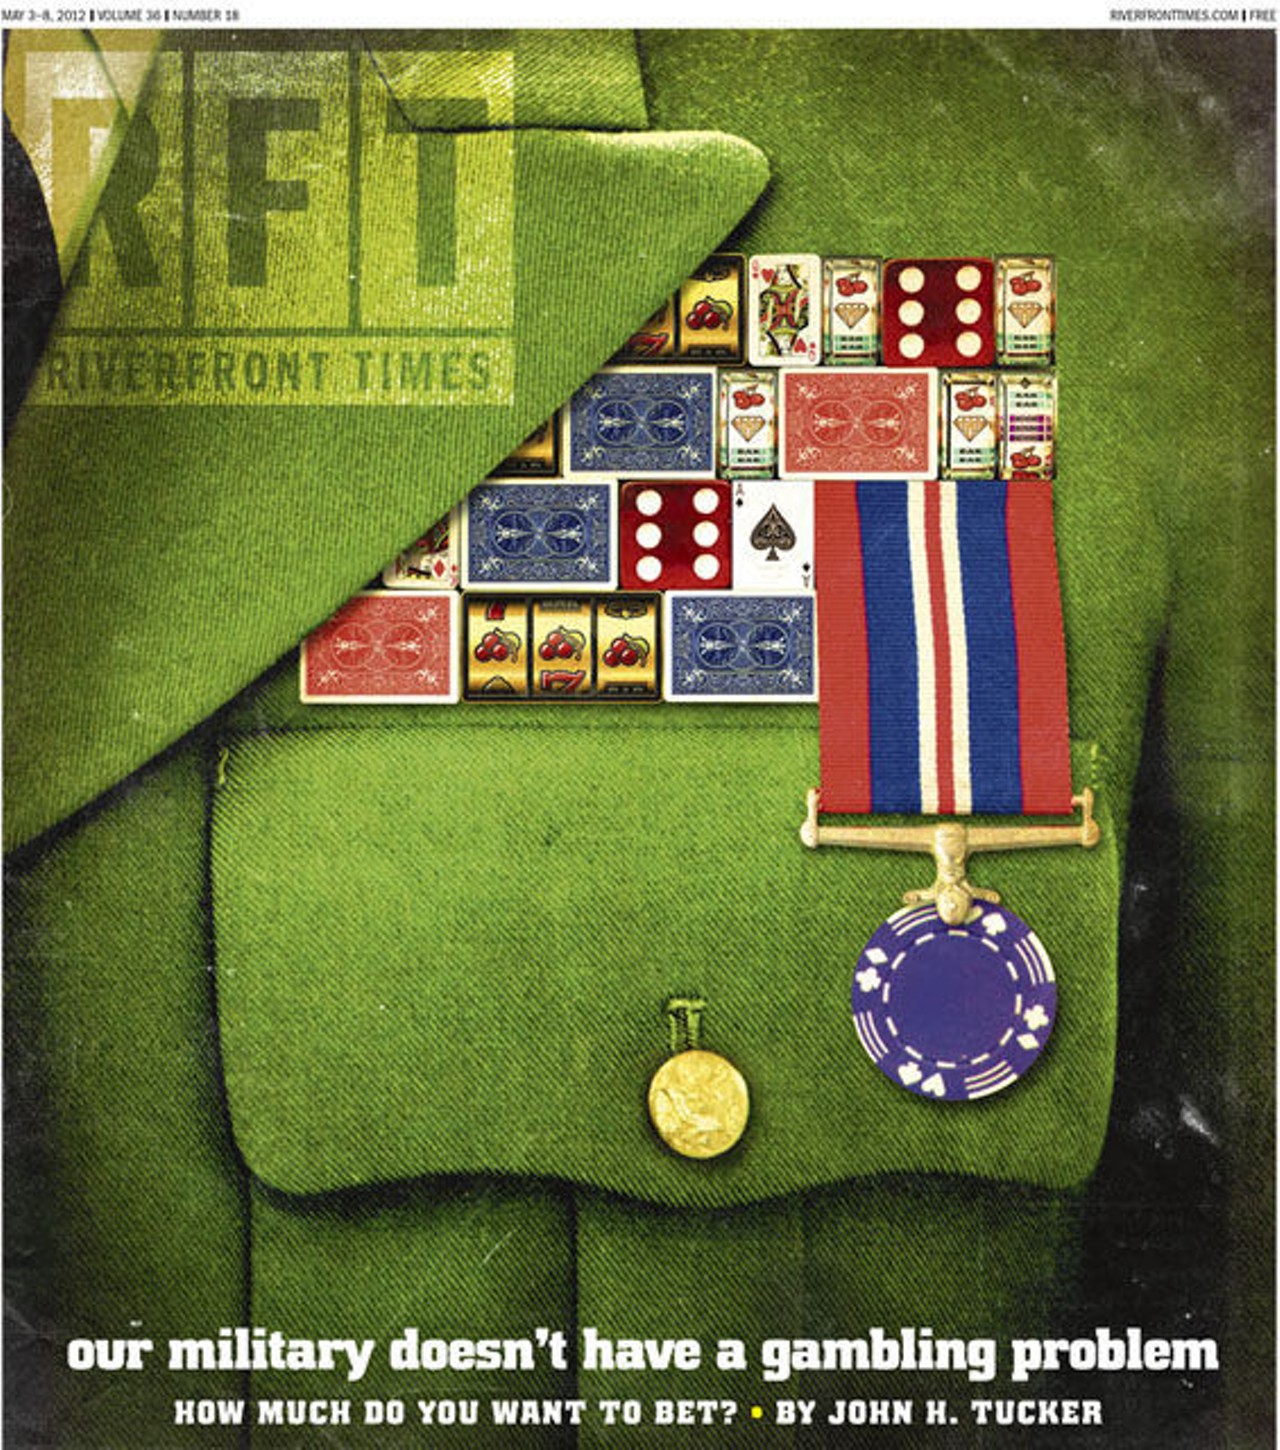 Combat veterans fall prey to gambling addictions at an alarming rate. Where's the military when the chips are down? by John H. Tucker in the May 3 issue. Cover: Illustration by Jesse Lenz.